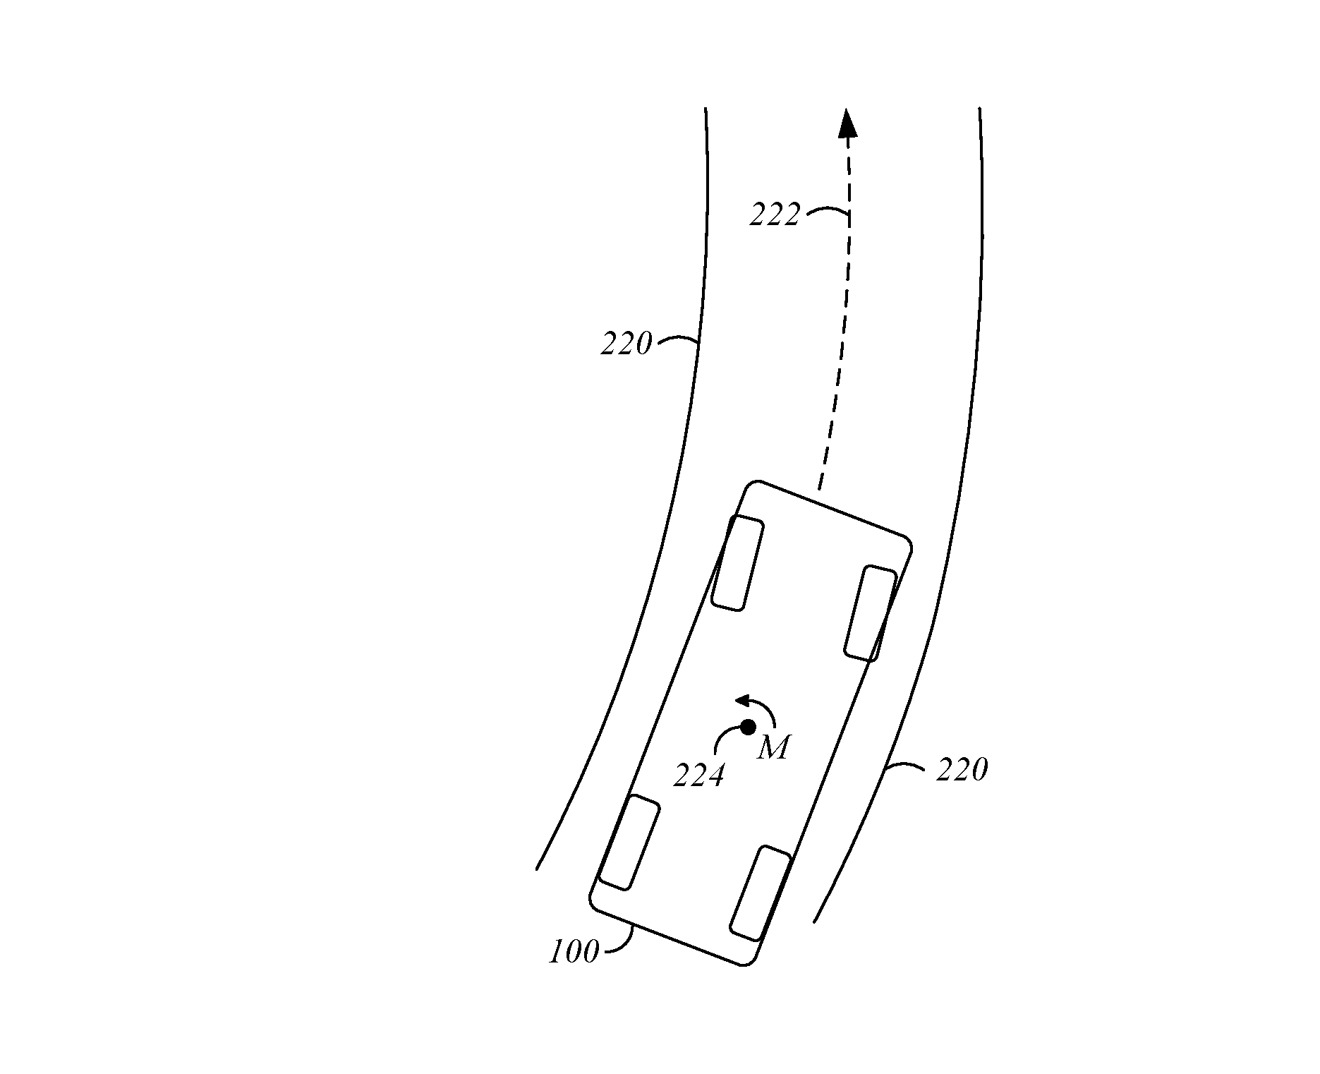 Detail from the patent showing the car detecting unstable, unintended movement